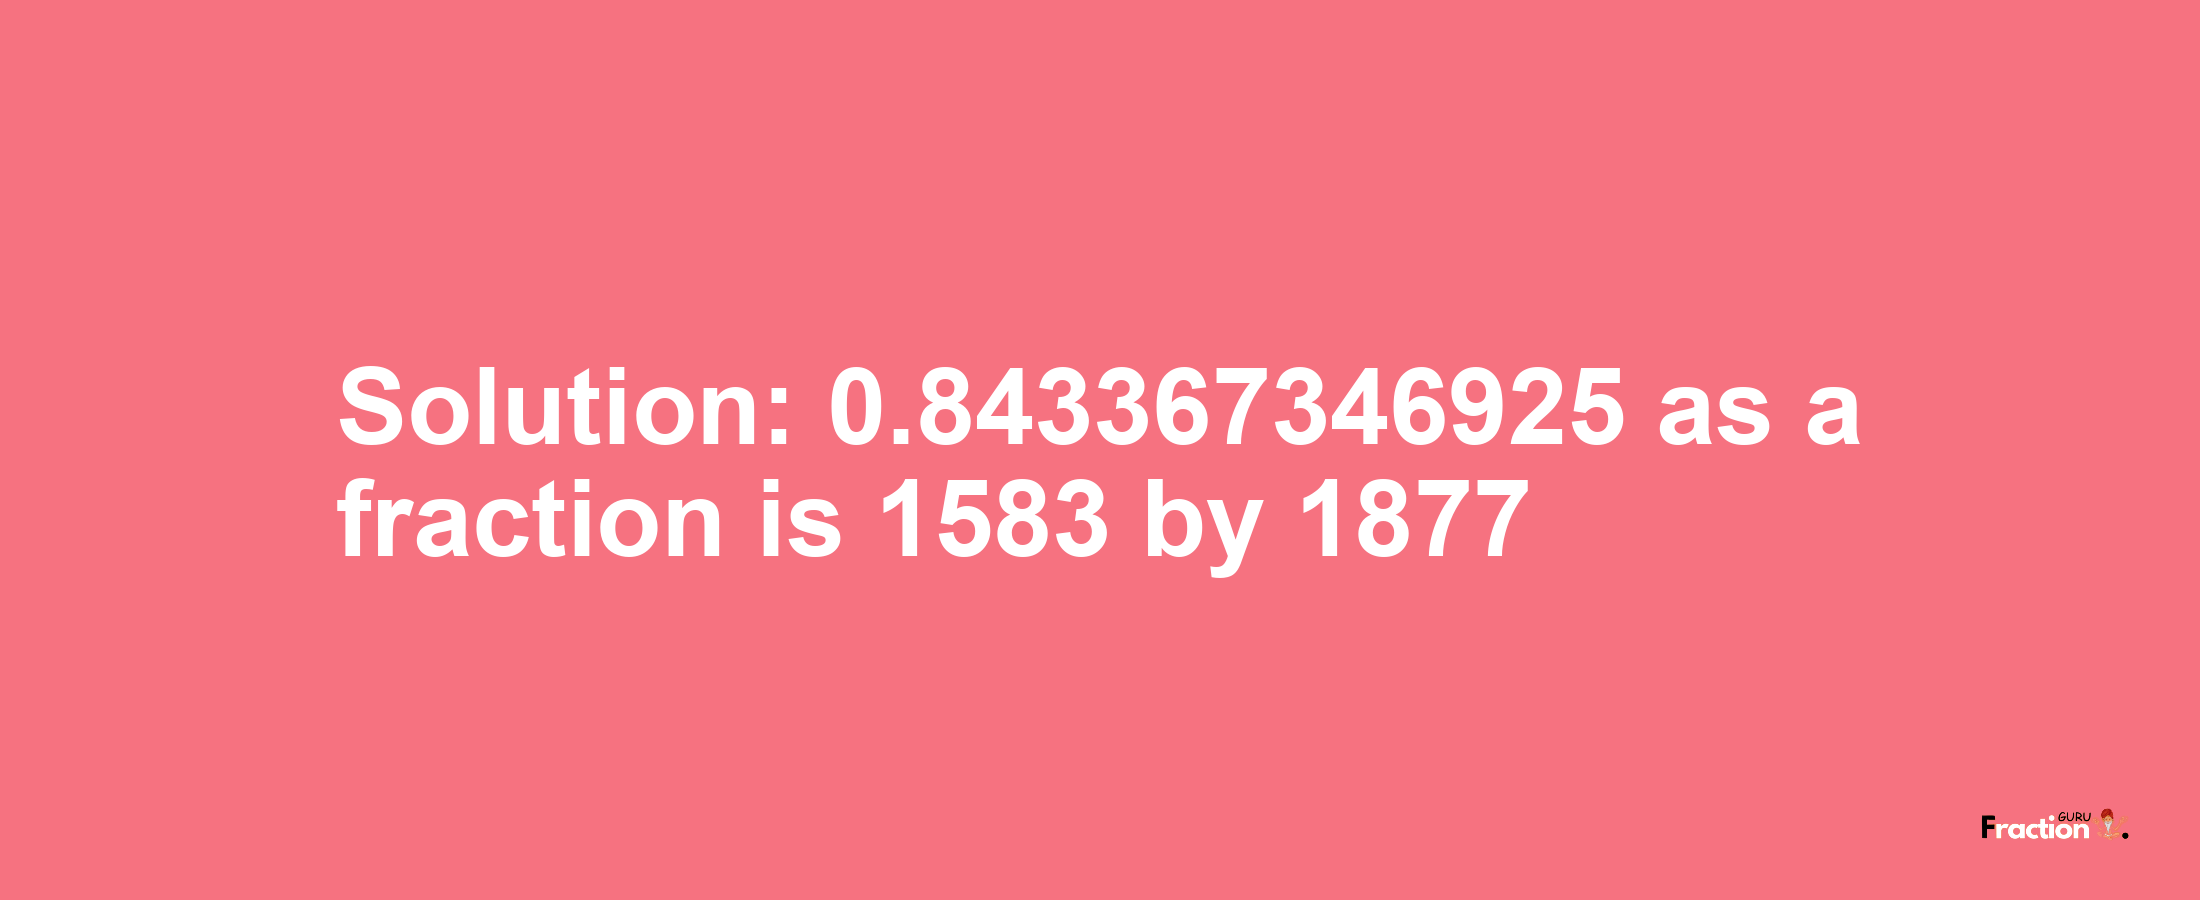 Solution:0.843367346925 as a fraction is 1583/1877